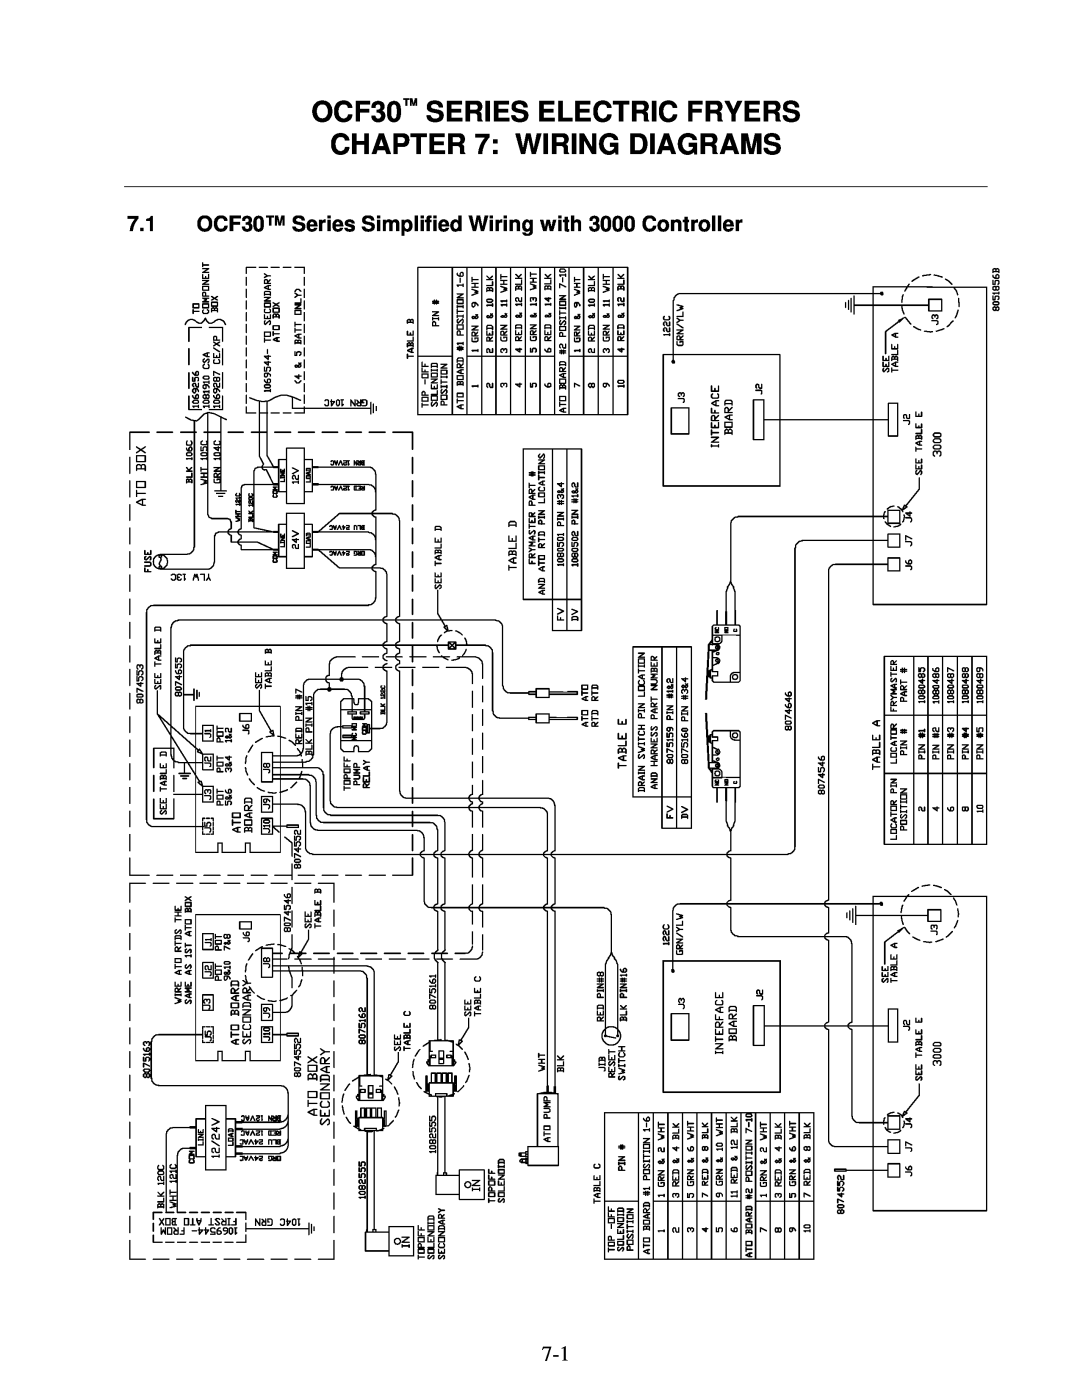 Frymaster operation manual Wiring Diagrams, OCF30 SERIES ELECTRIC FRYERS 